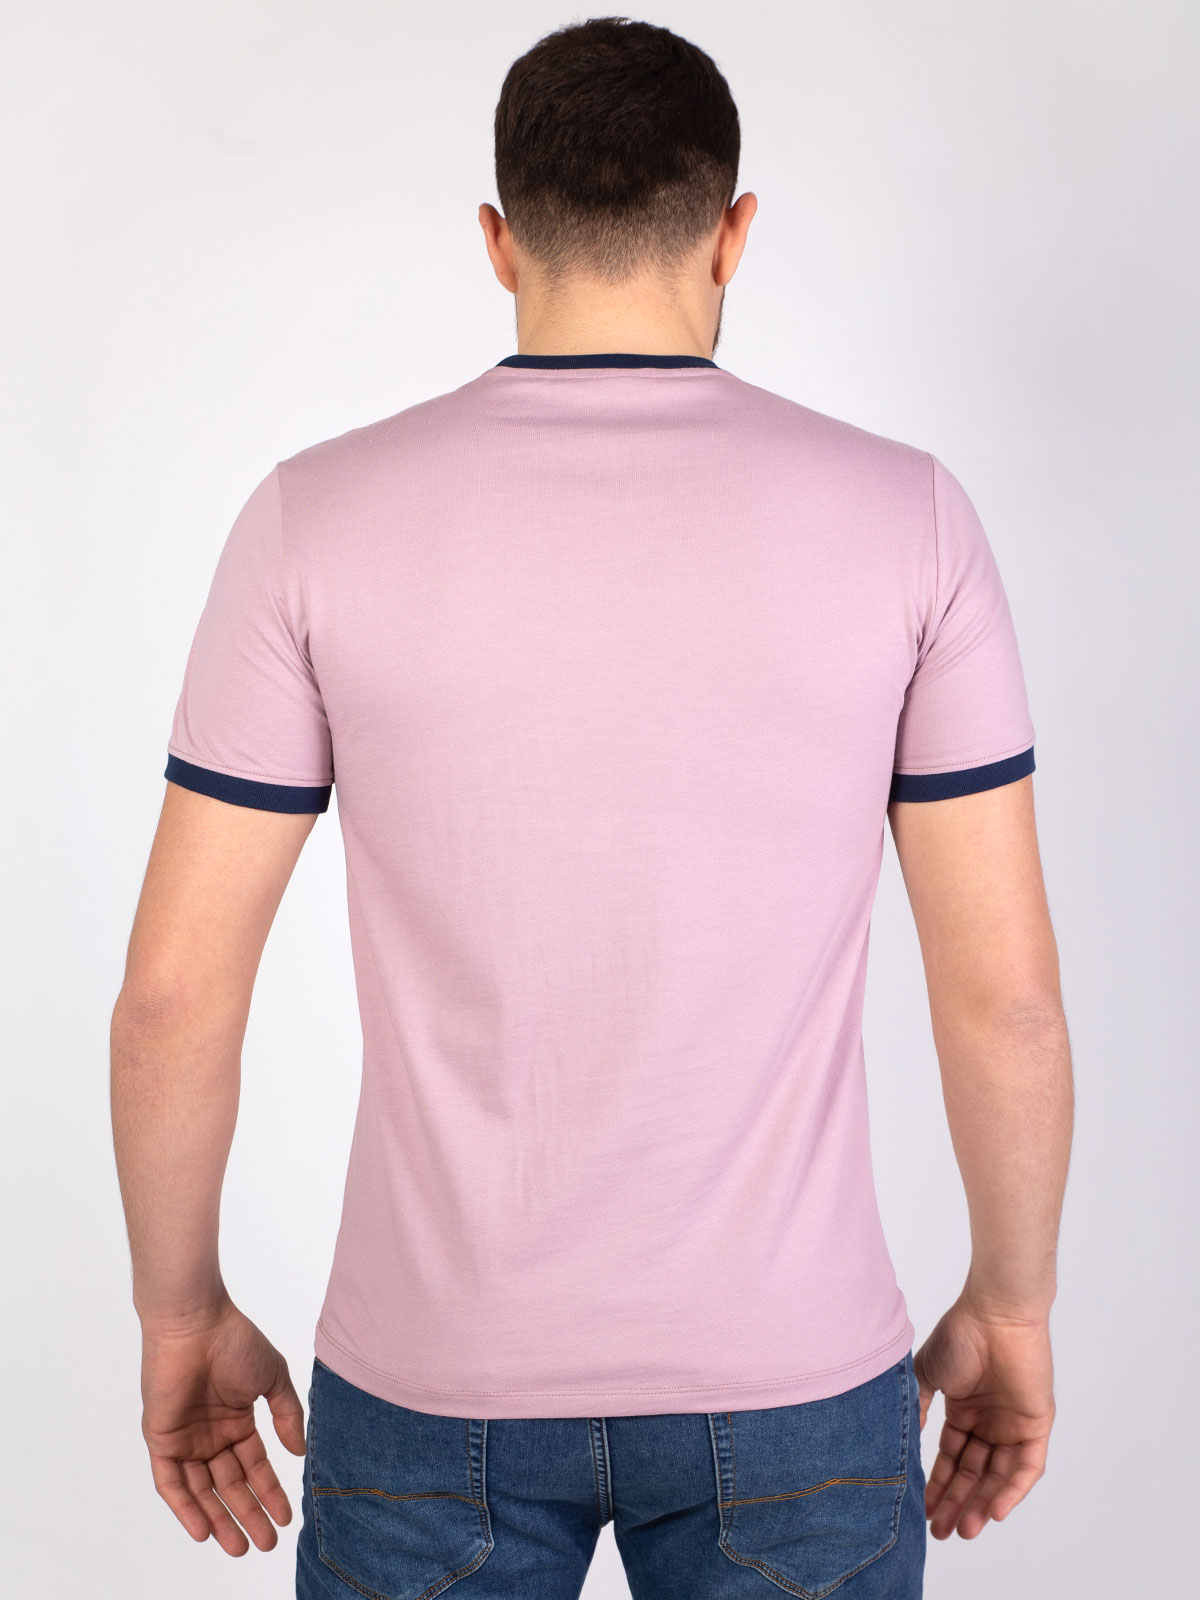 Tshirt in light purple with blue accent - 96390 € 12.37 img4